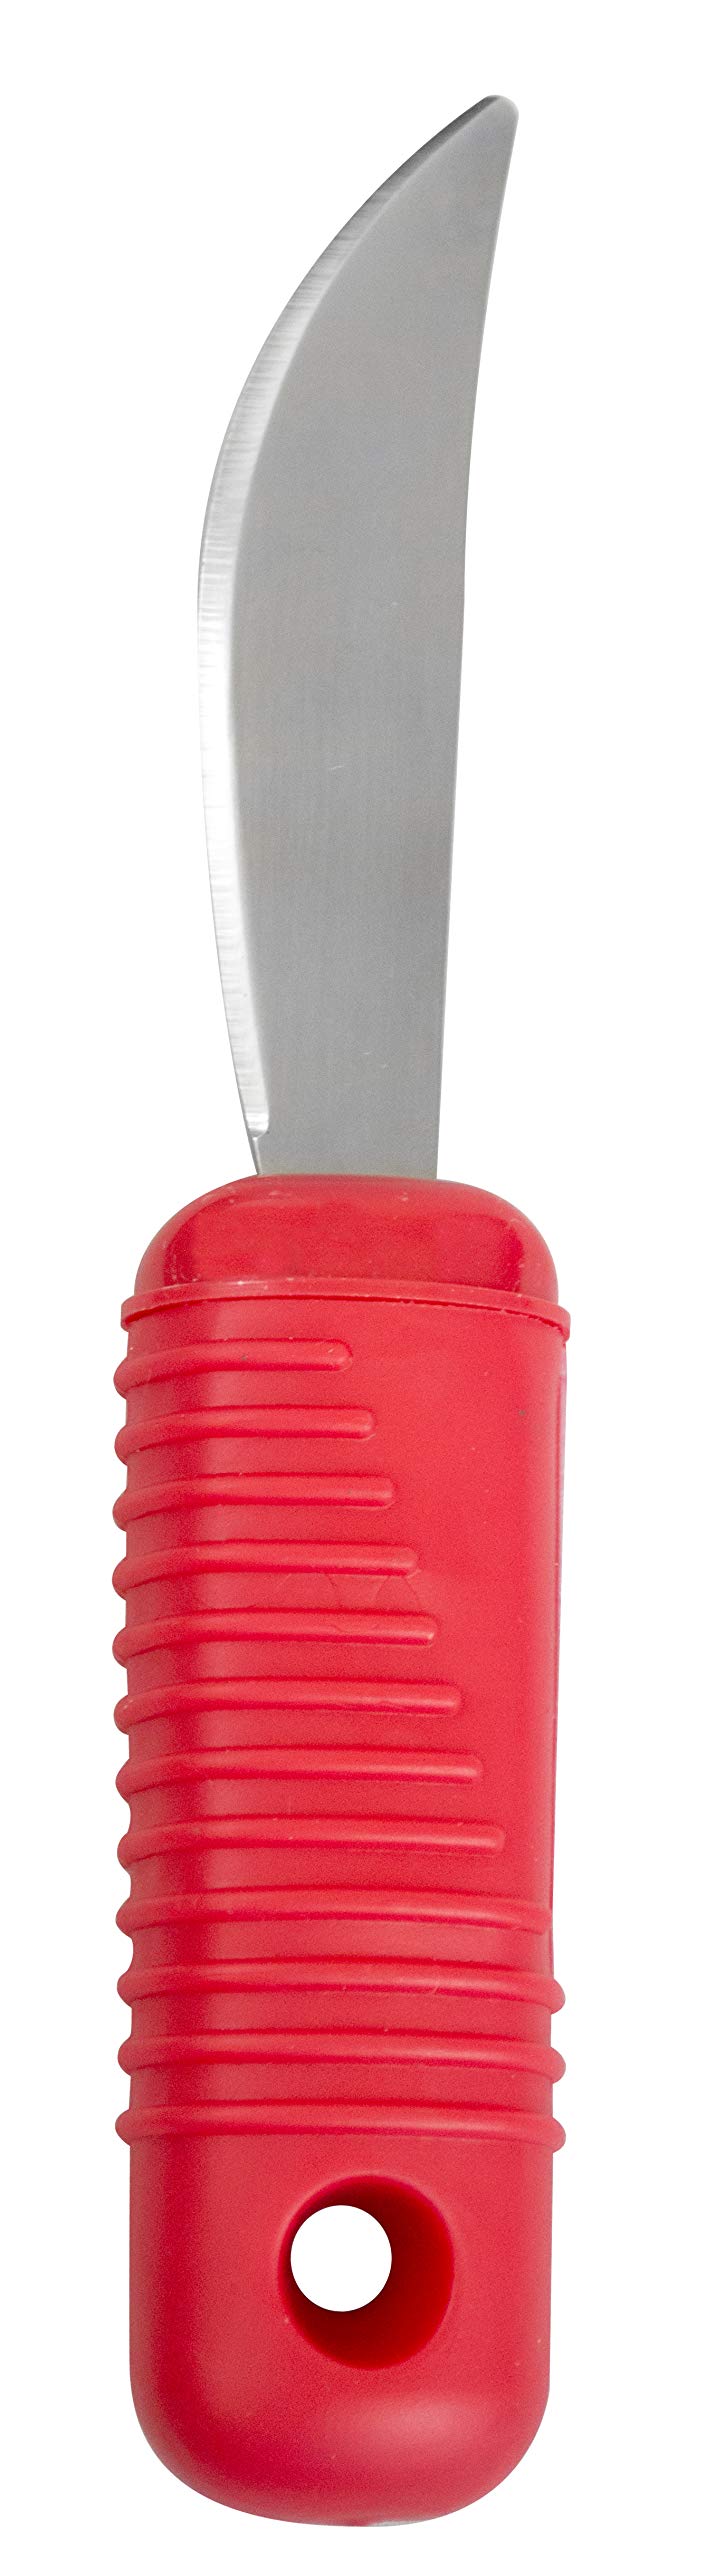 Essential Medical Supply Power of Red L5045 Utensil Set